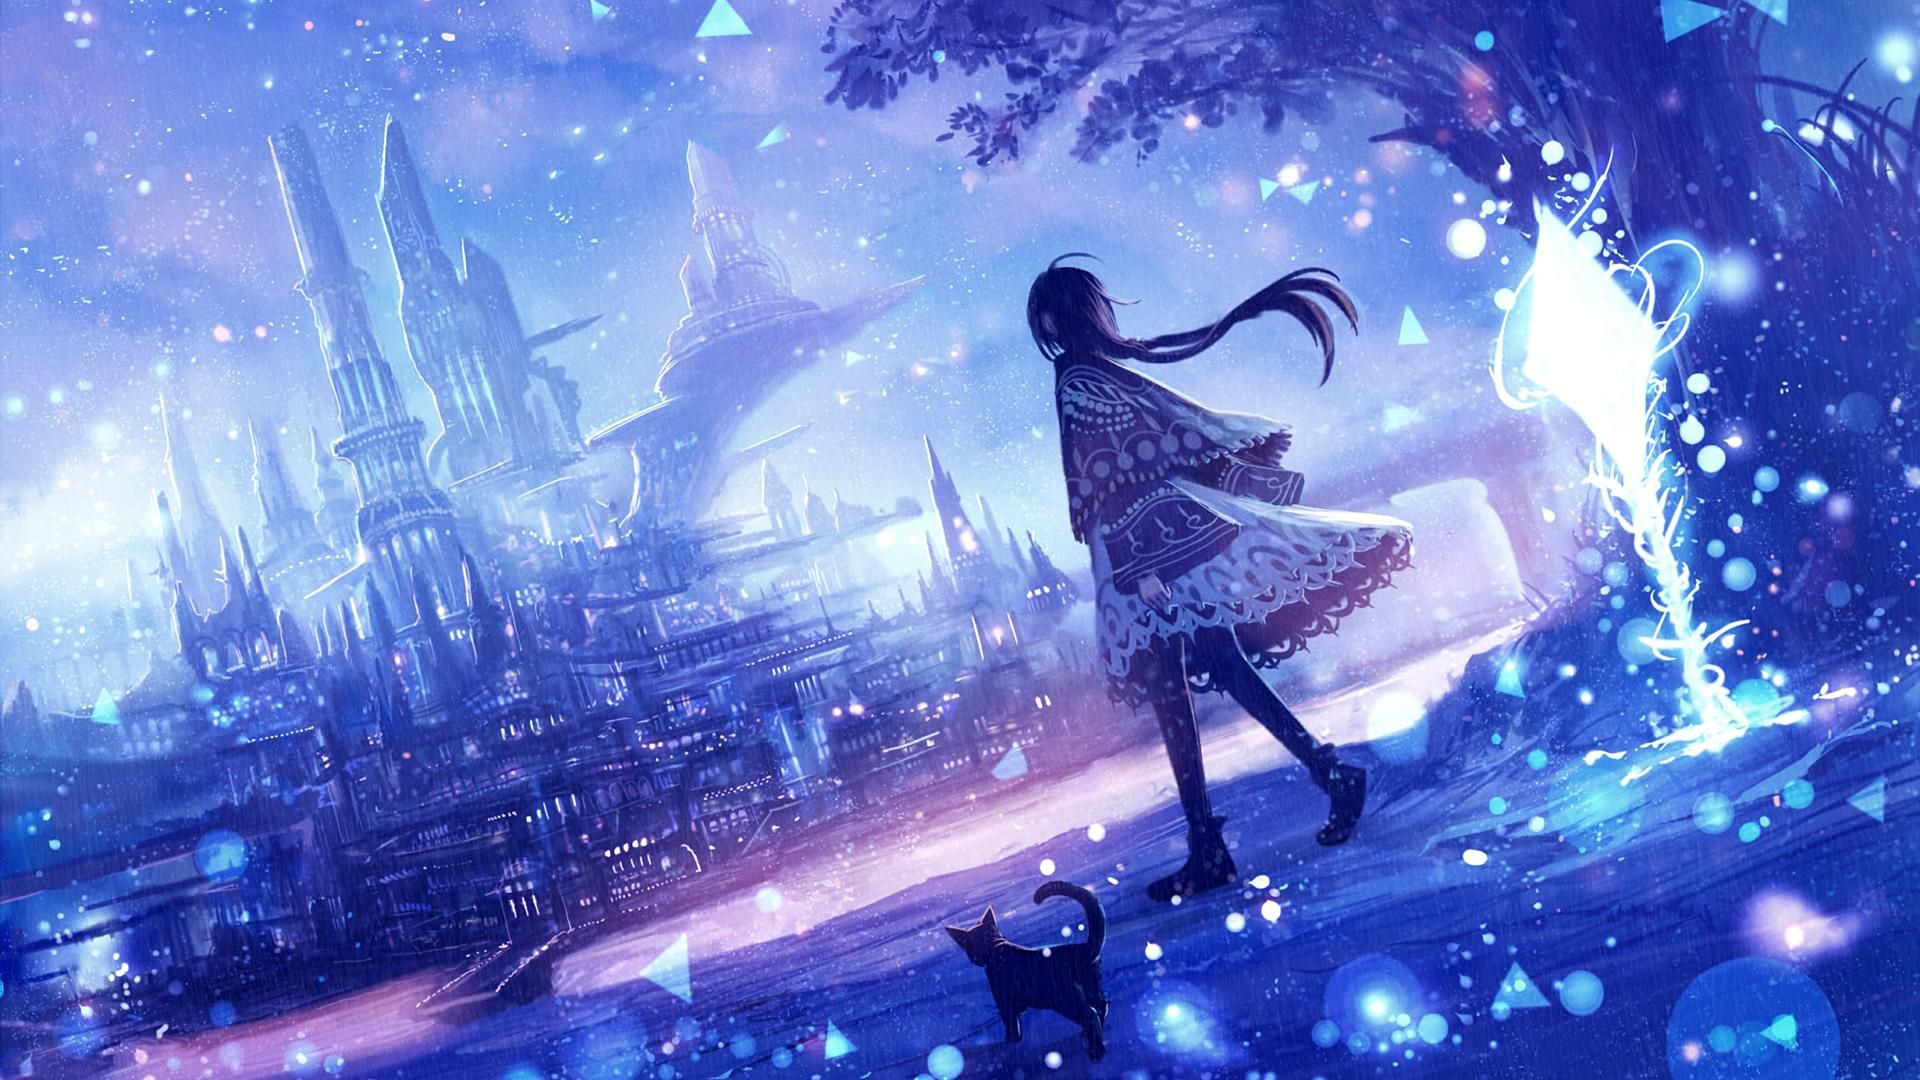 Free download Mystical 1920x1080 HD Wallpaper From Gallsourcecom Anime